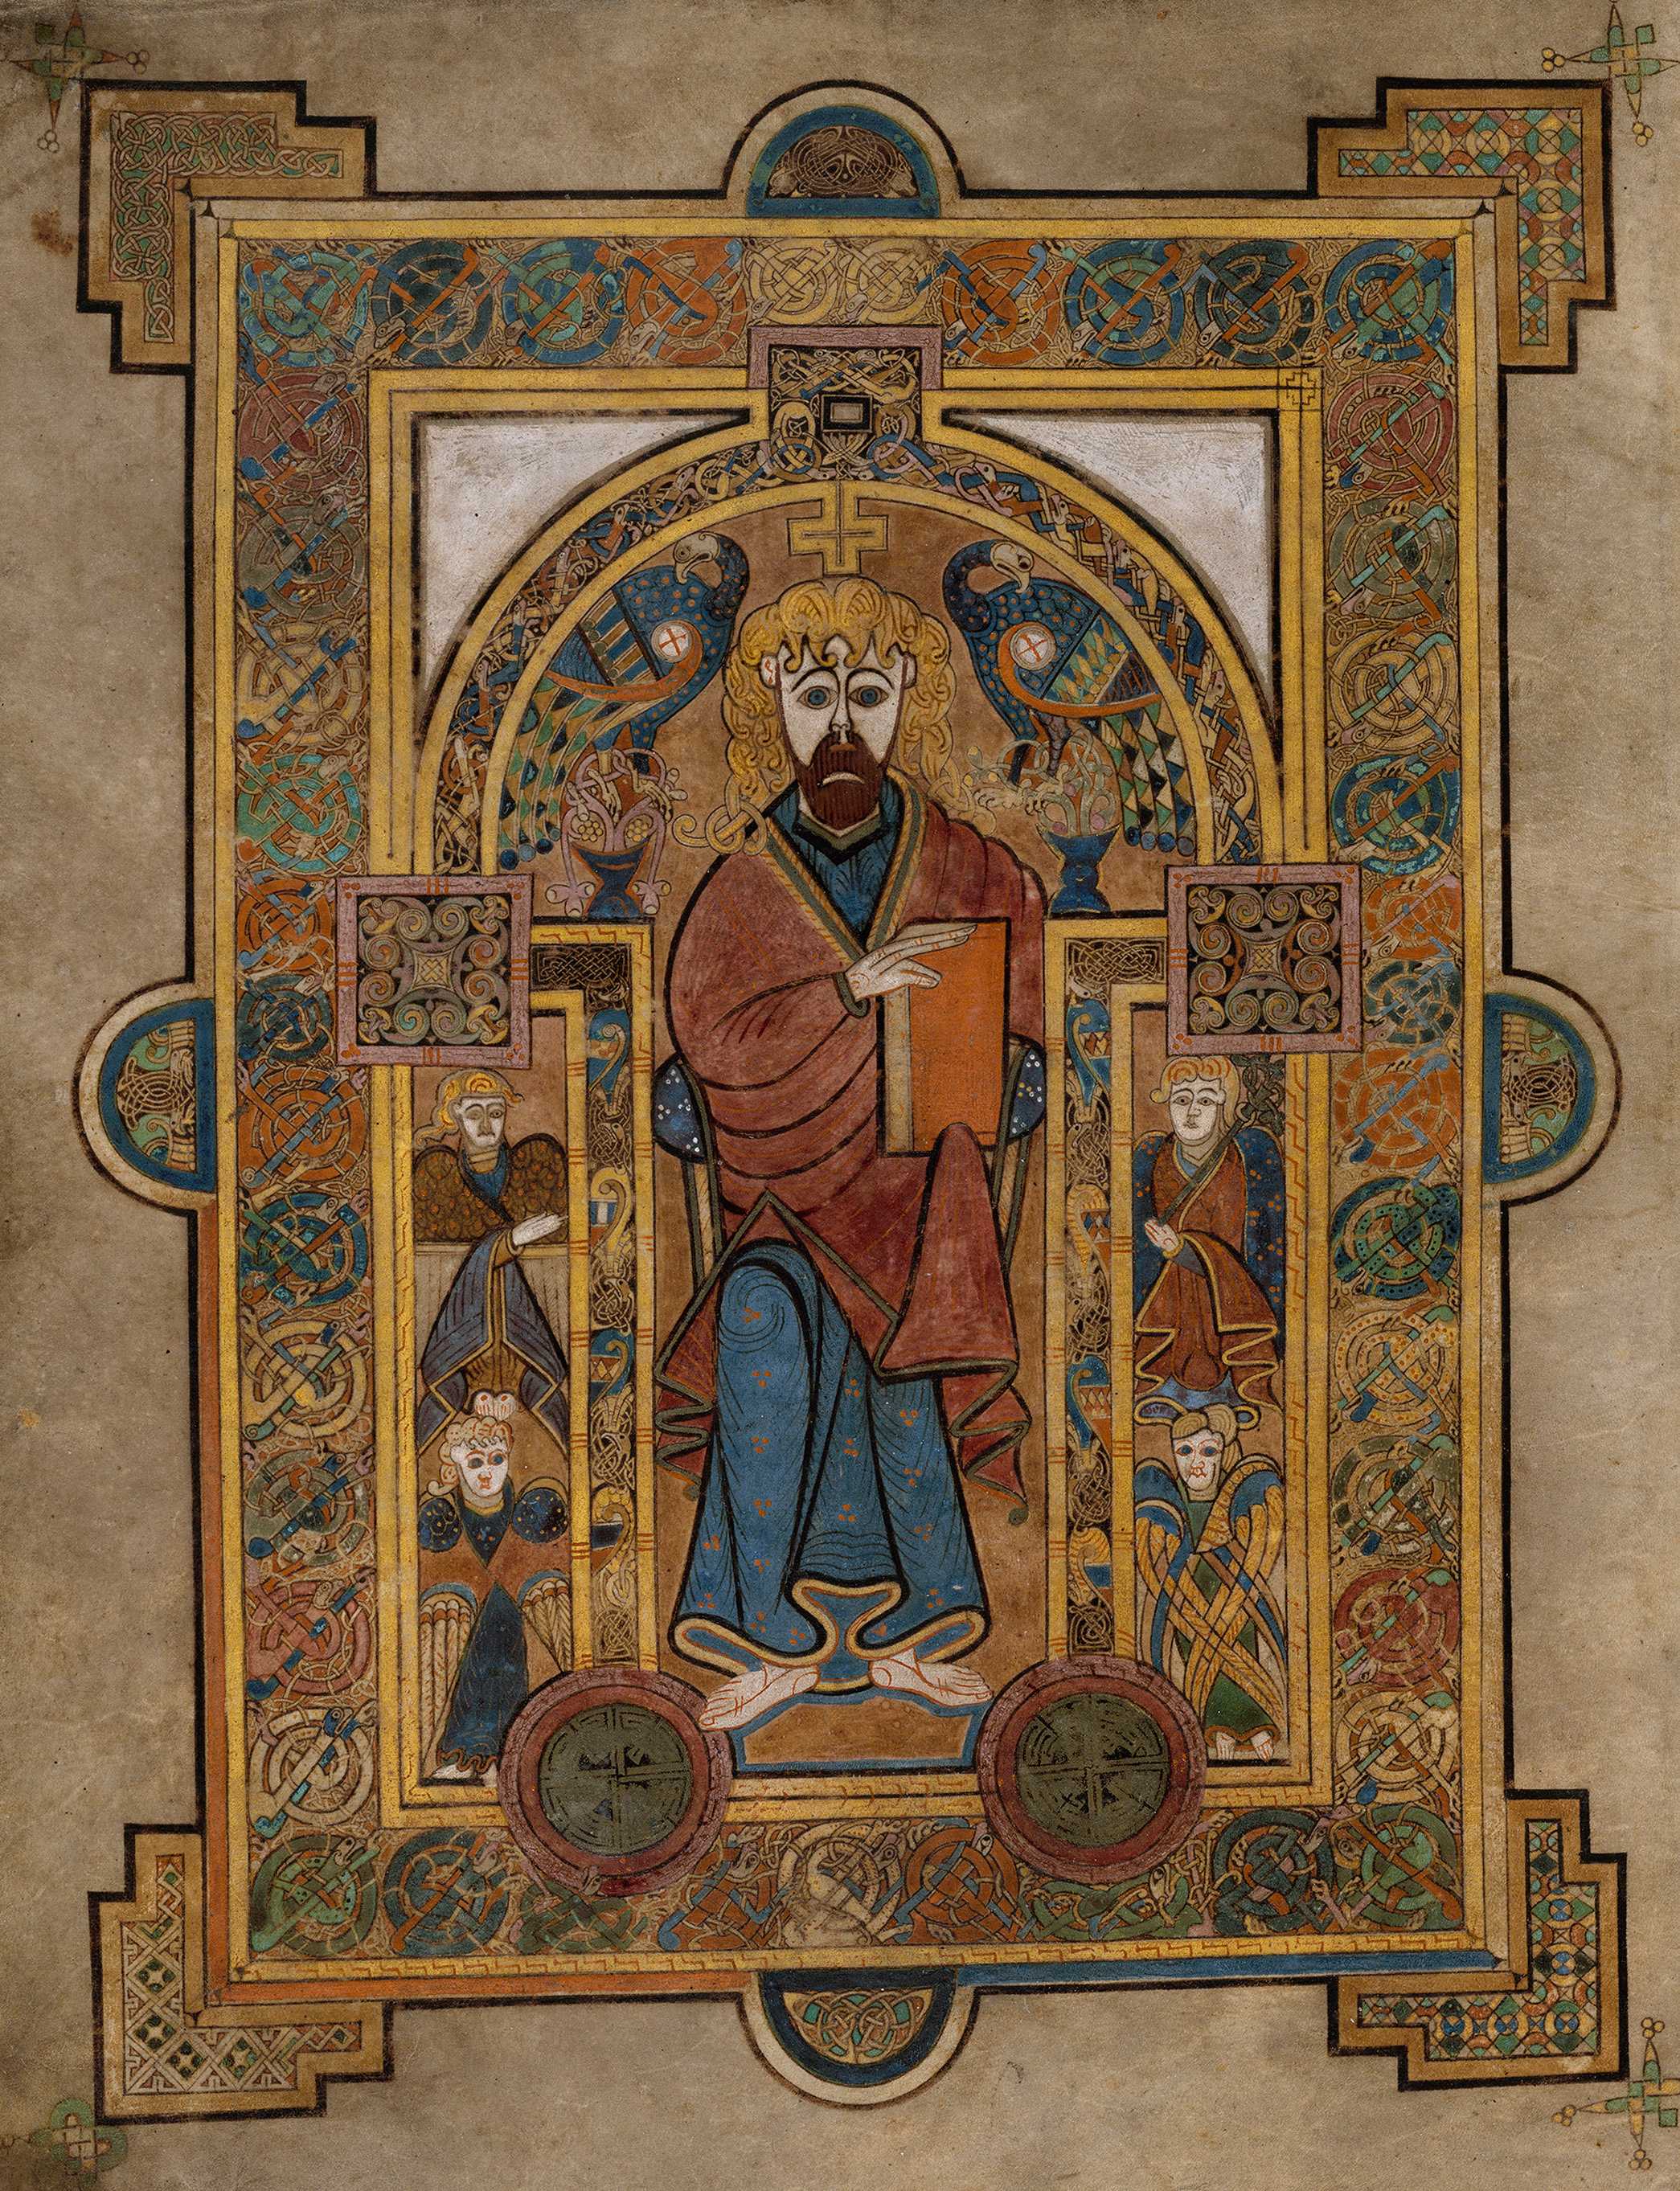 Find out more about Book of Kells - IE TCD MS 58